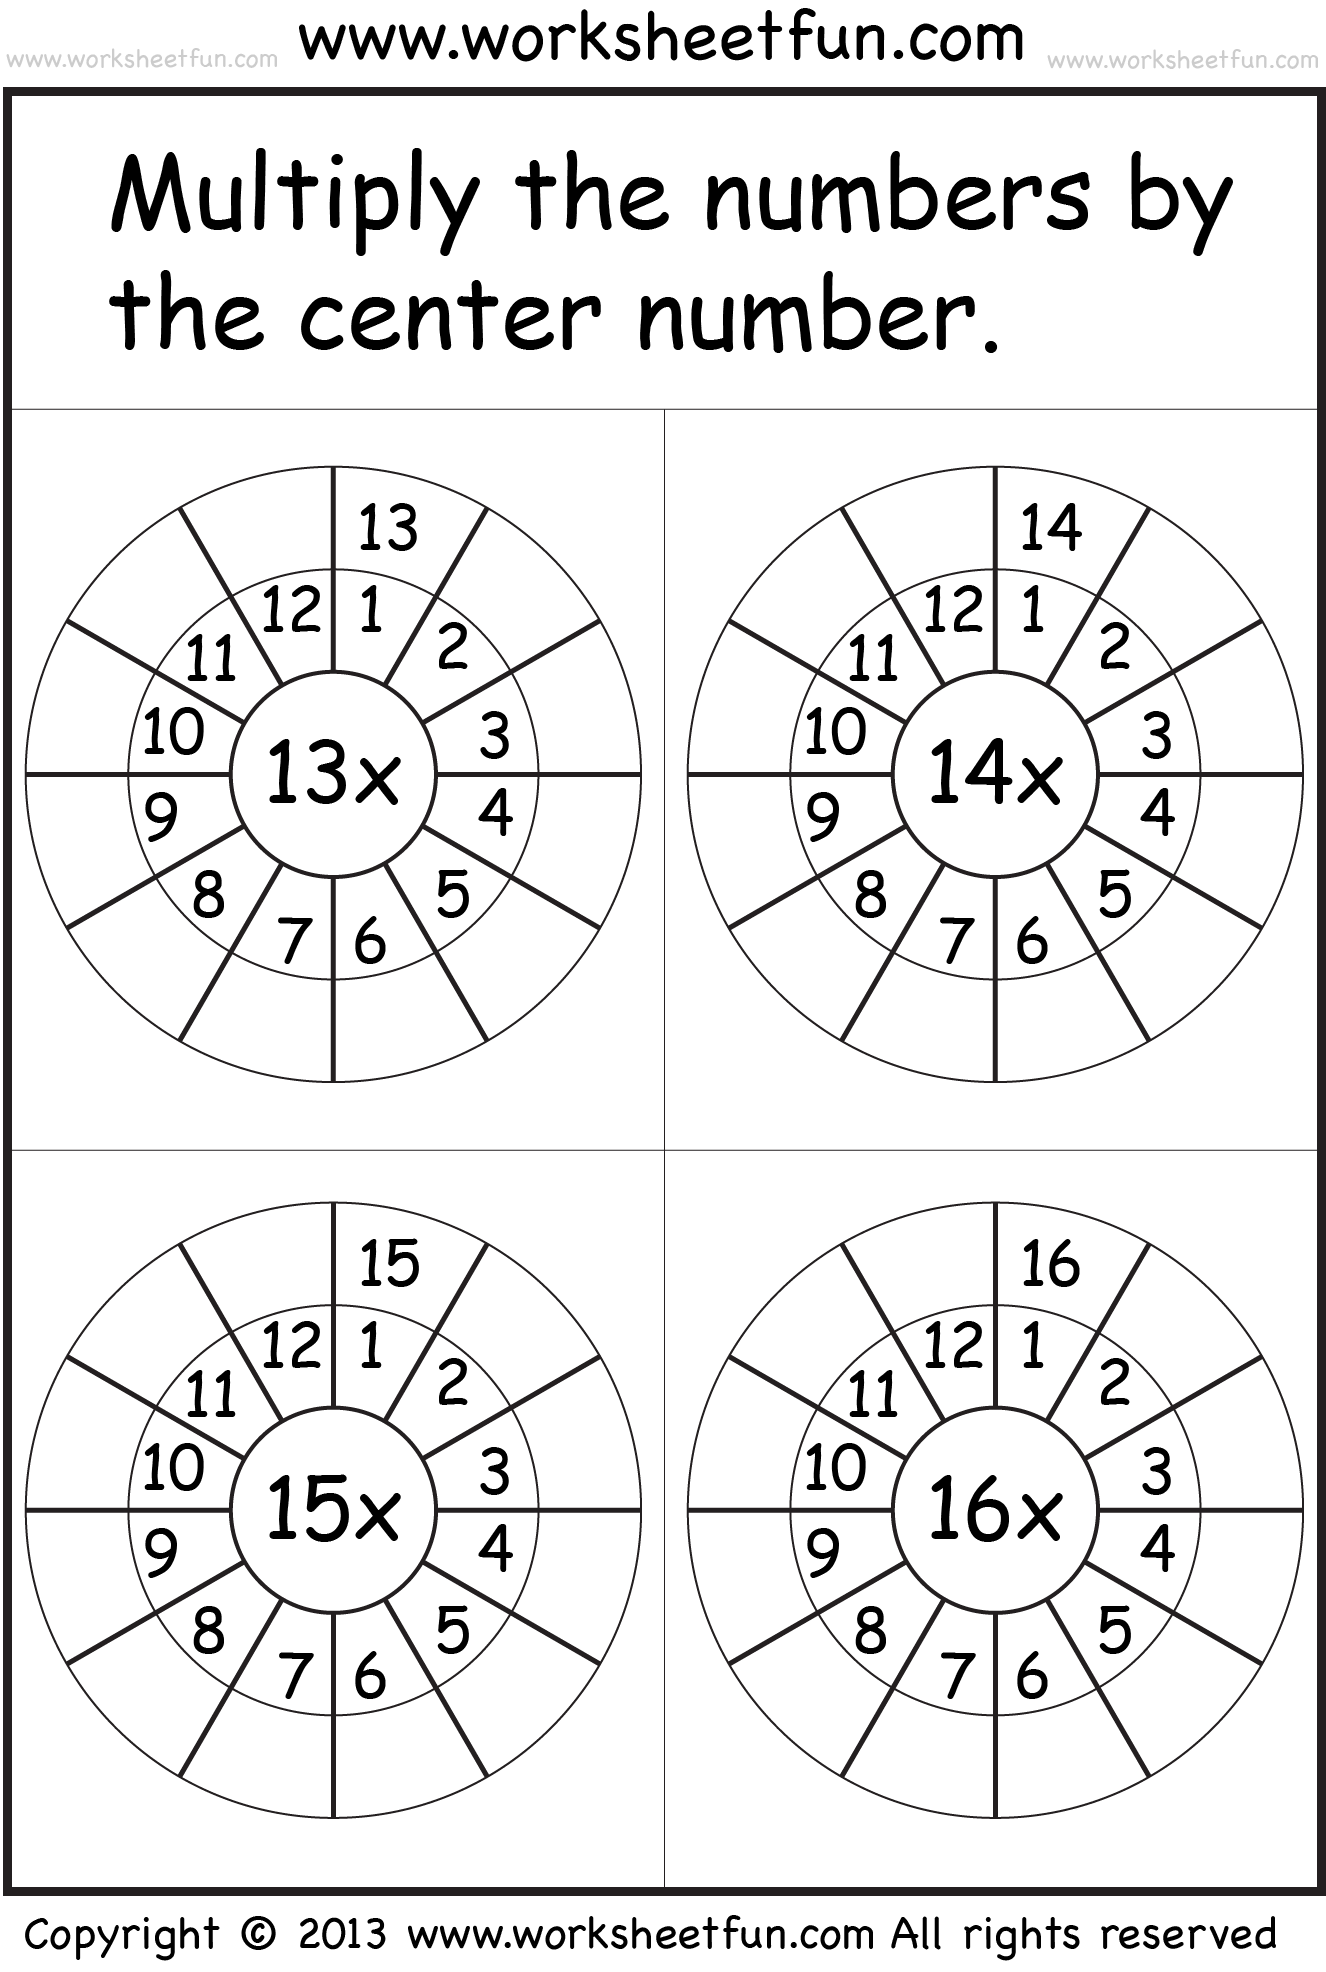 Times Table Worksheets - 1, 2, 3, 4, 5, 6, 7, 8, 9, 10, 11 ...